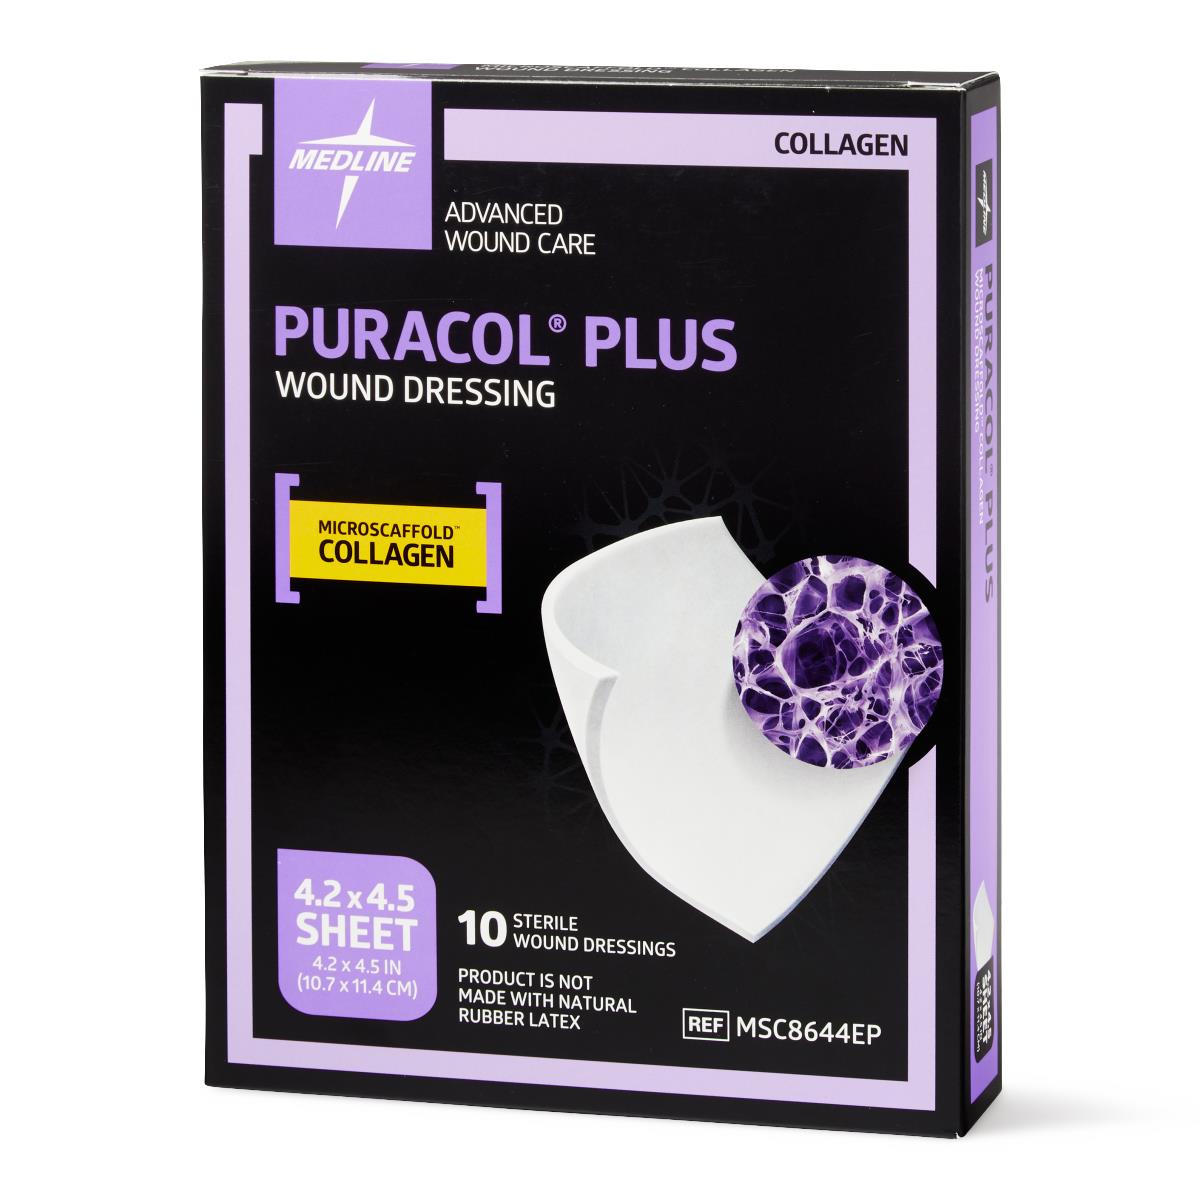 Puracol Plus Collagen Dressings, 4.25x4.5in (Box of 10)